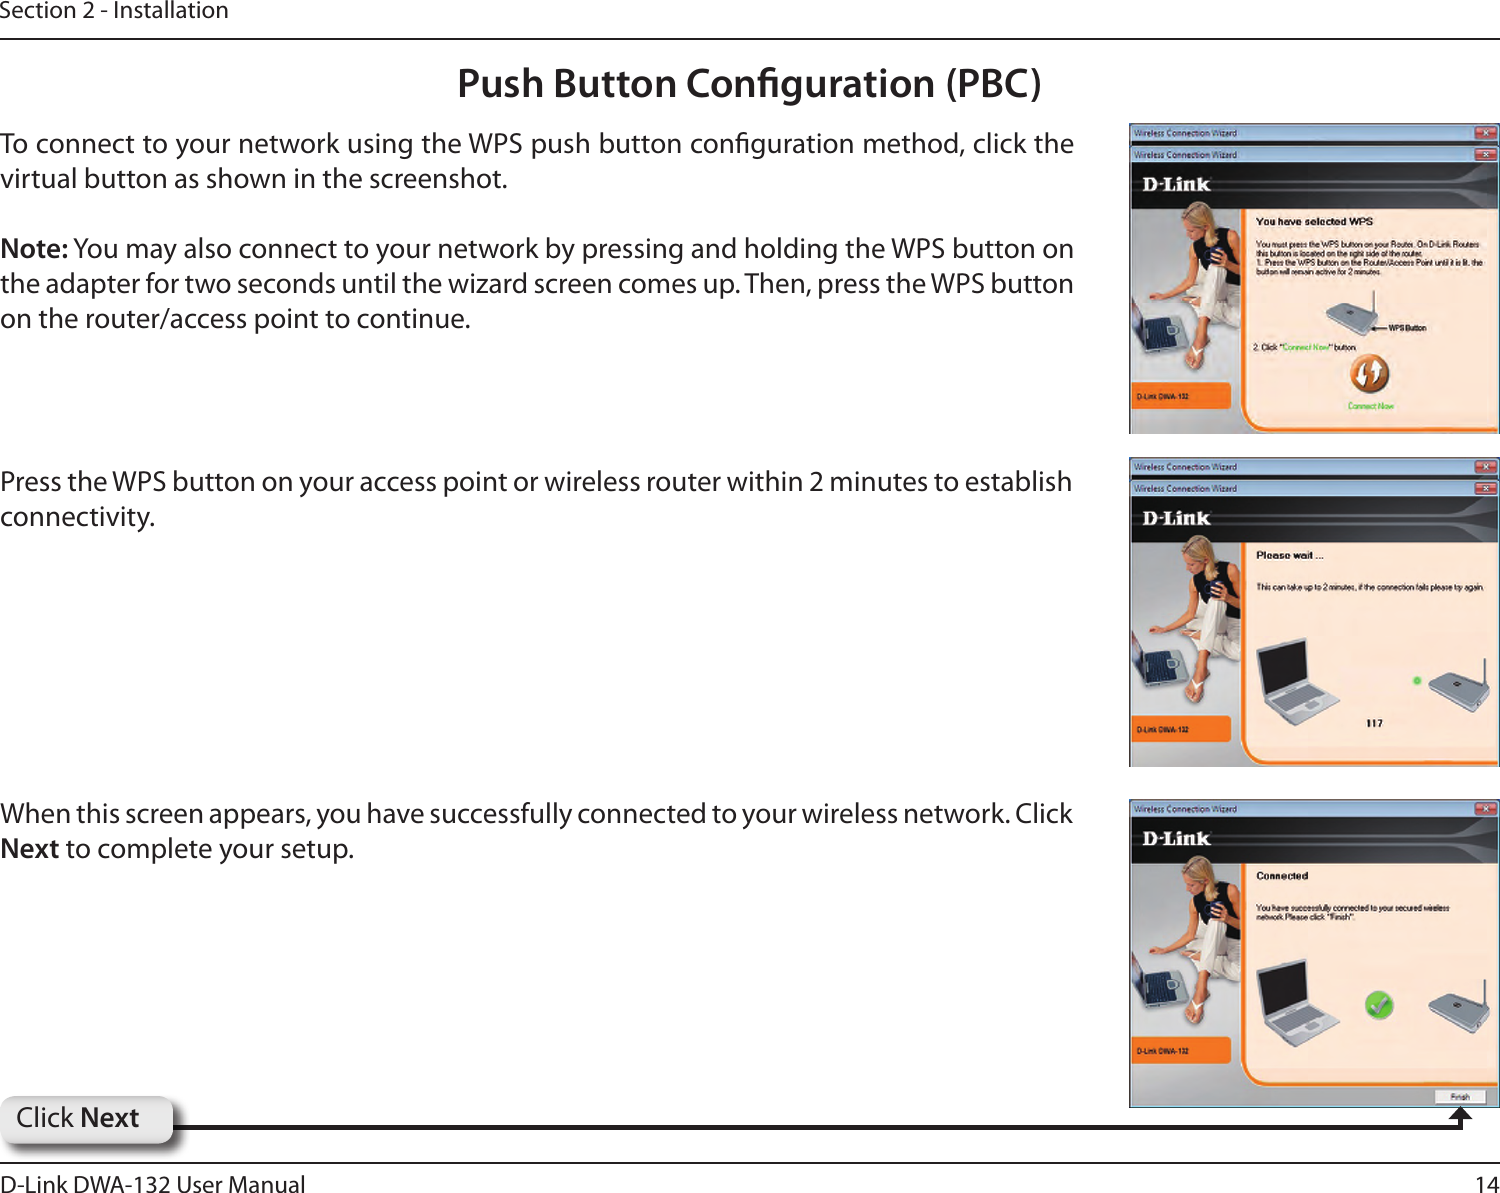 14D-Link DWA-132 User ManualSection 2 - InstallationTo connect to your network using the WPS push button conguration method, click the virtual button as shown in the screenshot. Note: You may also connect to your network by pressing and holding the WPS button on the adapter for two seconds until the wizard screen comes up. Then, press the WPS button on the router/access point to continue.  Press the WPS button on your access point or wireless router within 2 minutes to establish connectivity.  When this screen appears, you have successfully connected to your wireless network. Click Next to complete your setup.Click NextPush Button Conguration (PBC)